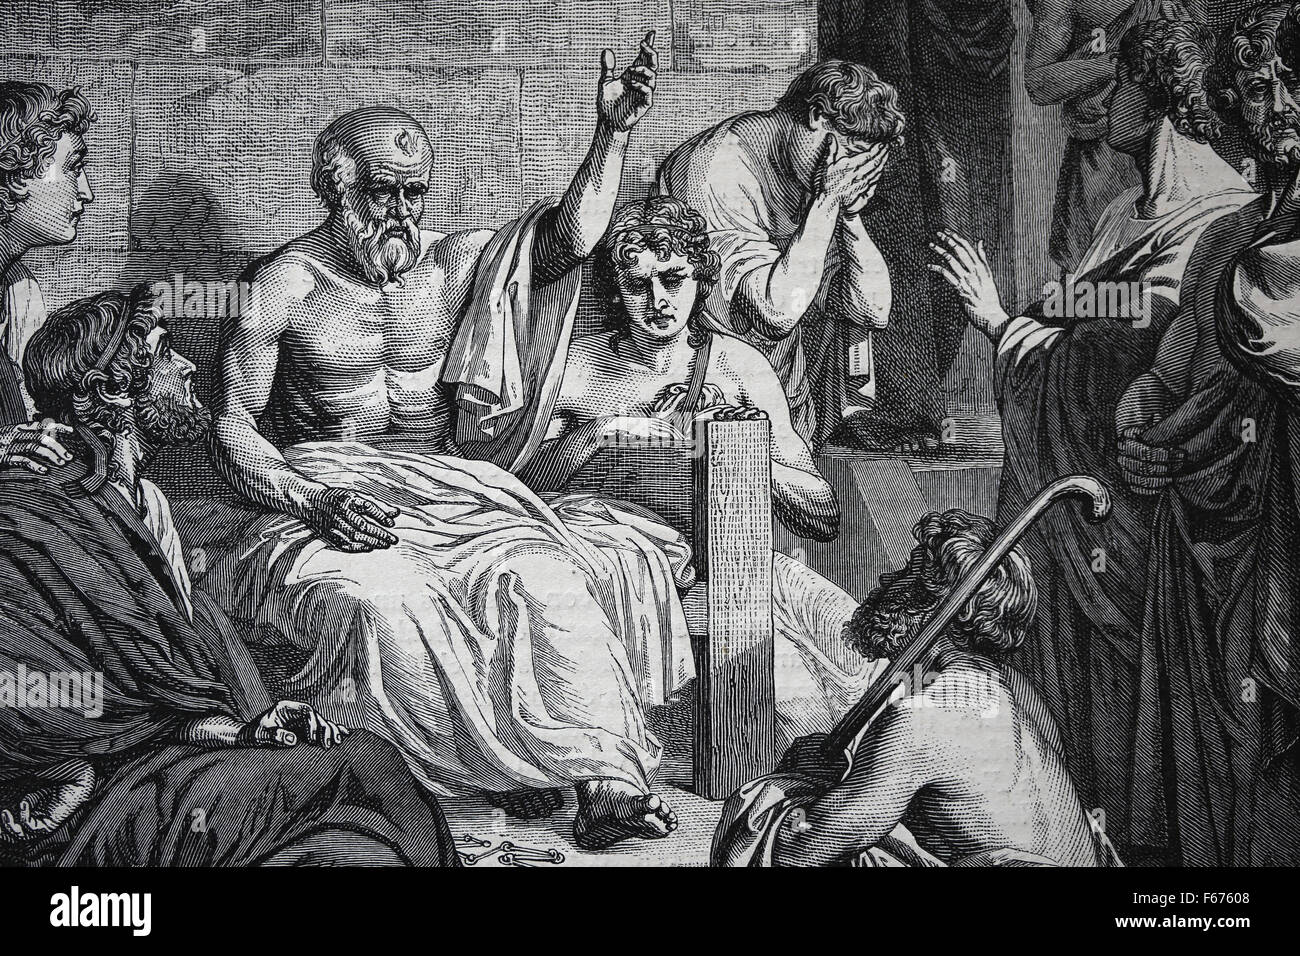 Death of Socrates (469 BC-399 BC)  Classical Greek philosopher. Engraving, 19th century. Later colouration. Stock Photo